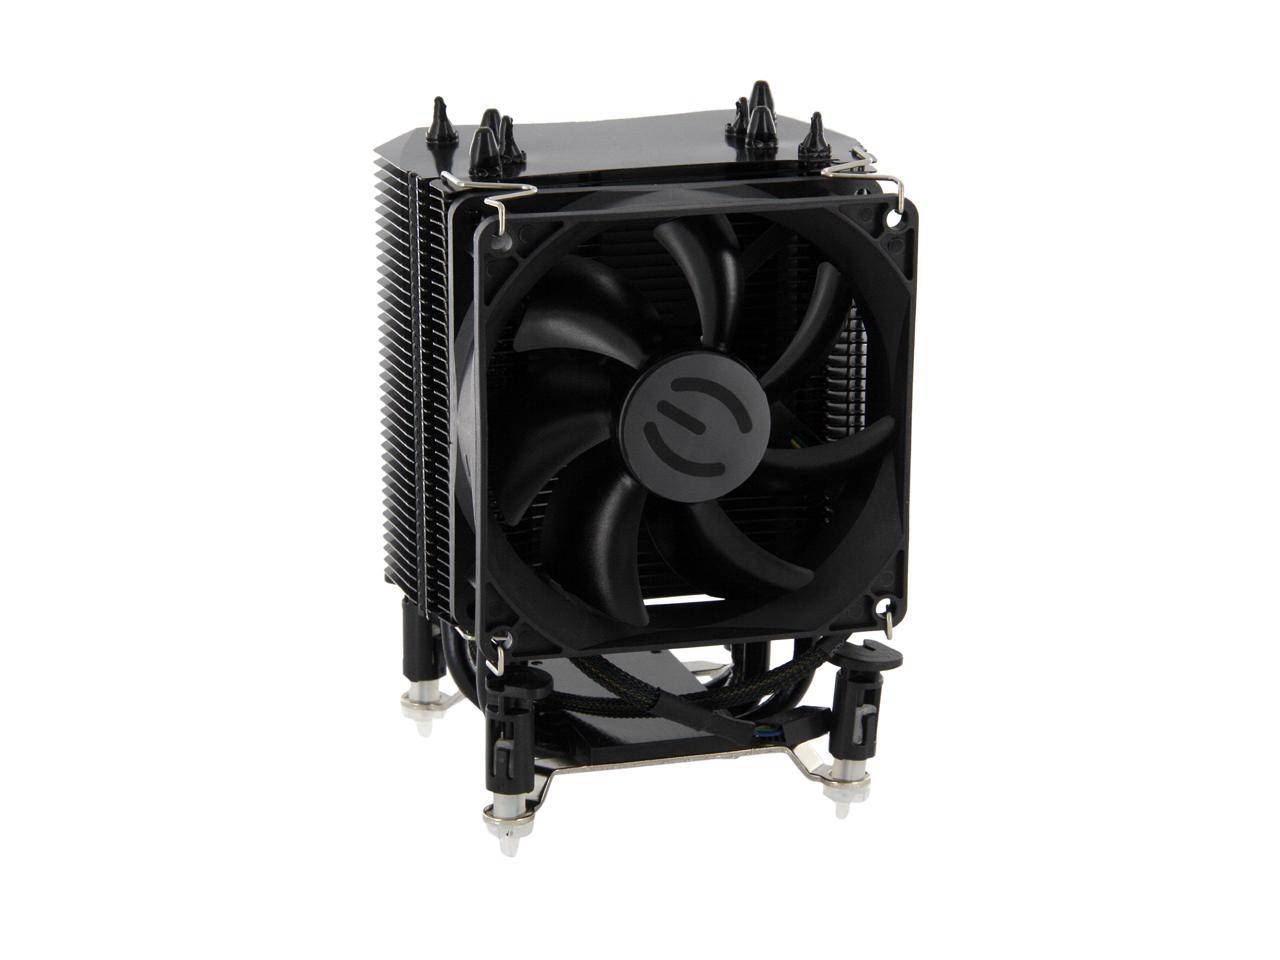 Intel Socket 1150/1155/1156 ACX CPU Cooler 100-FS-C901-KR EVGA mITX 92mm Direct Touch 4 Heat Pipe Sleeve 